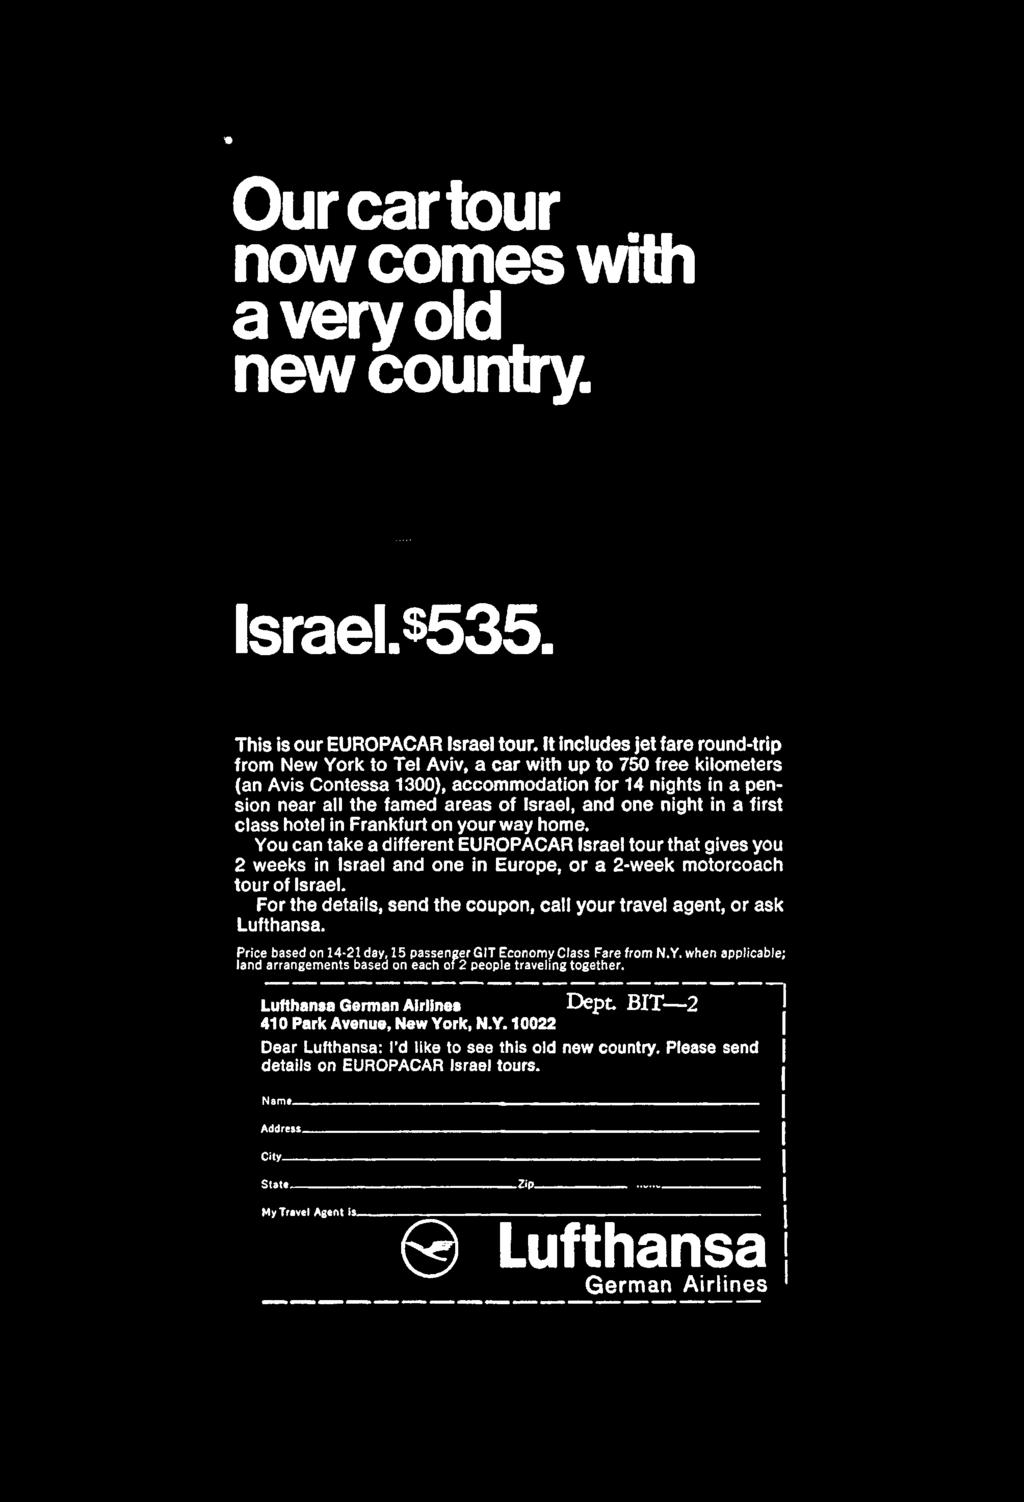 * Our car tour now comes with a very old new country. Israel.s535. This is our EUROPACAR Israel tour.